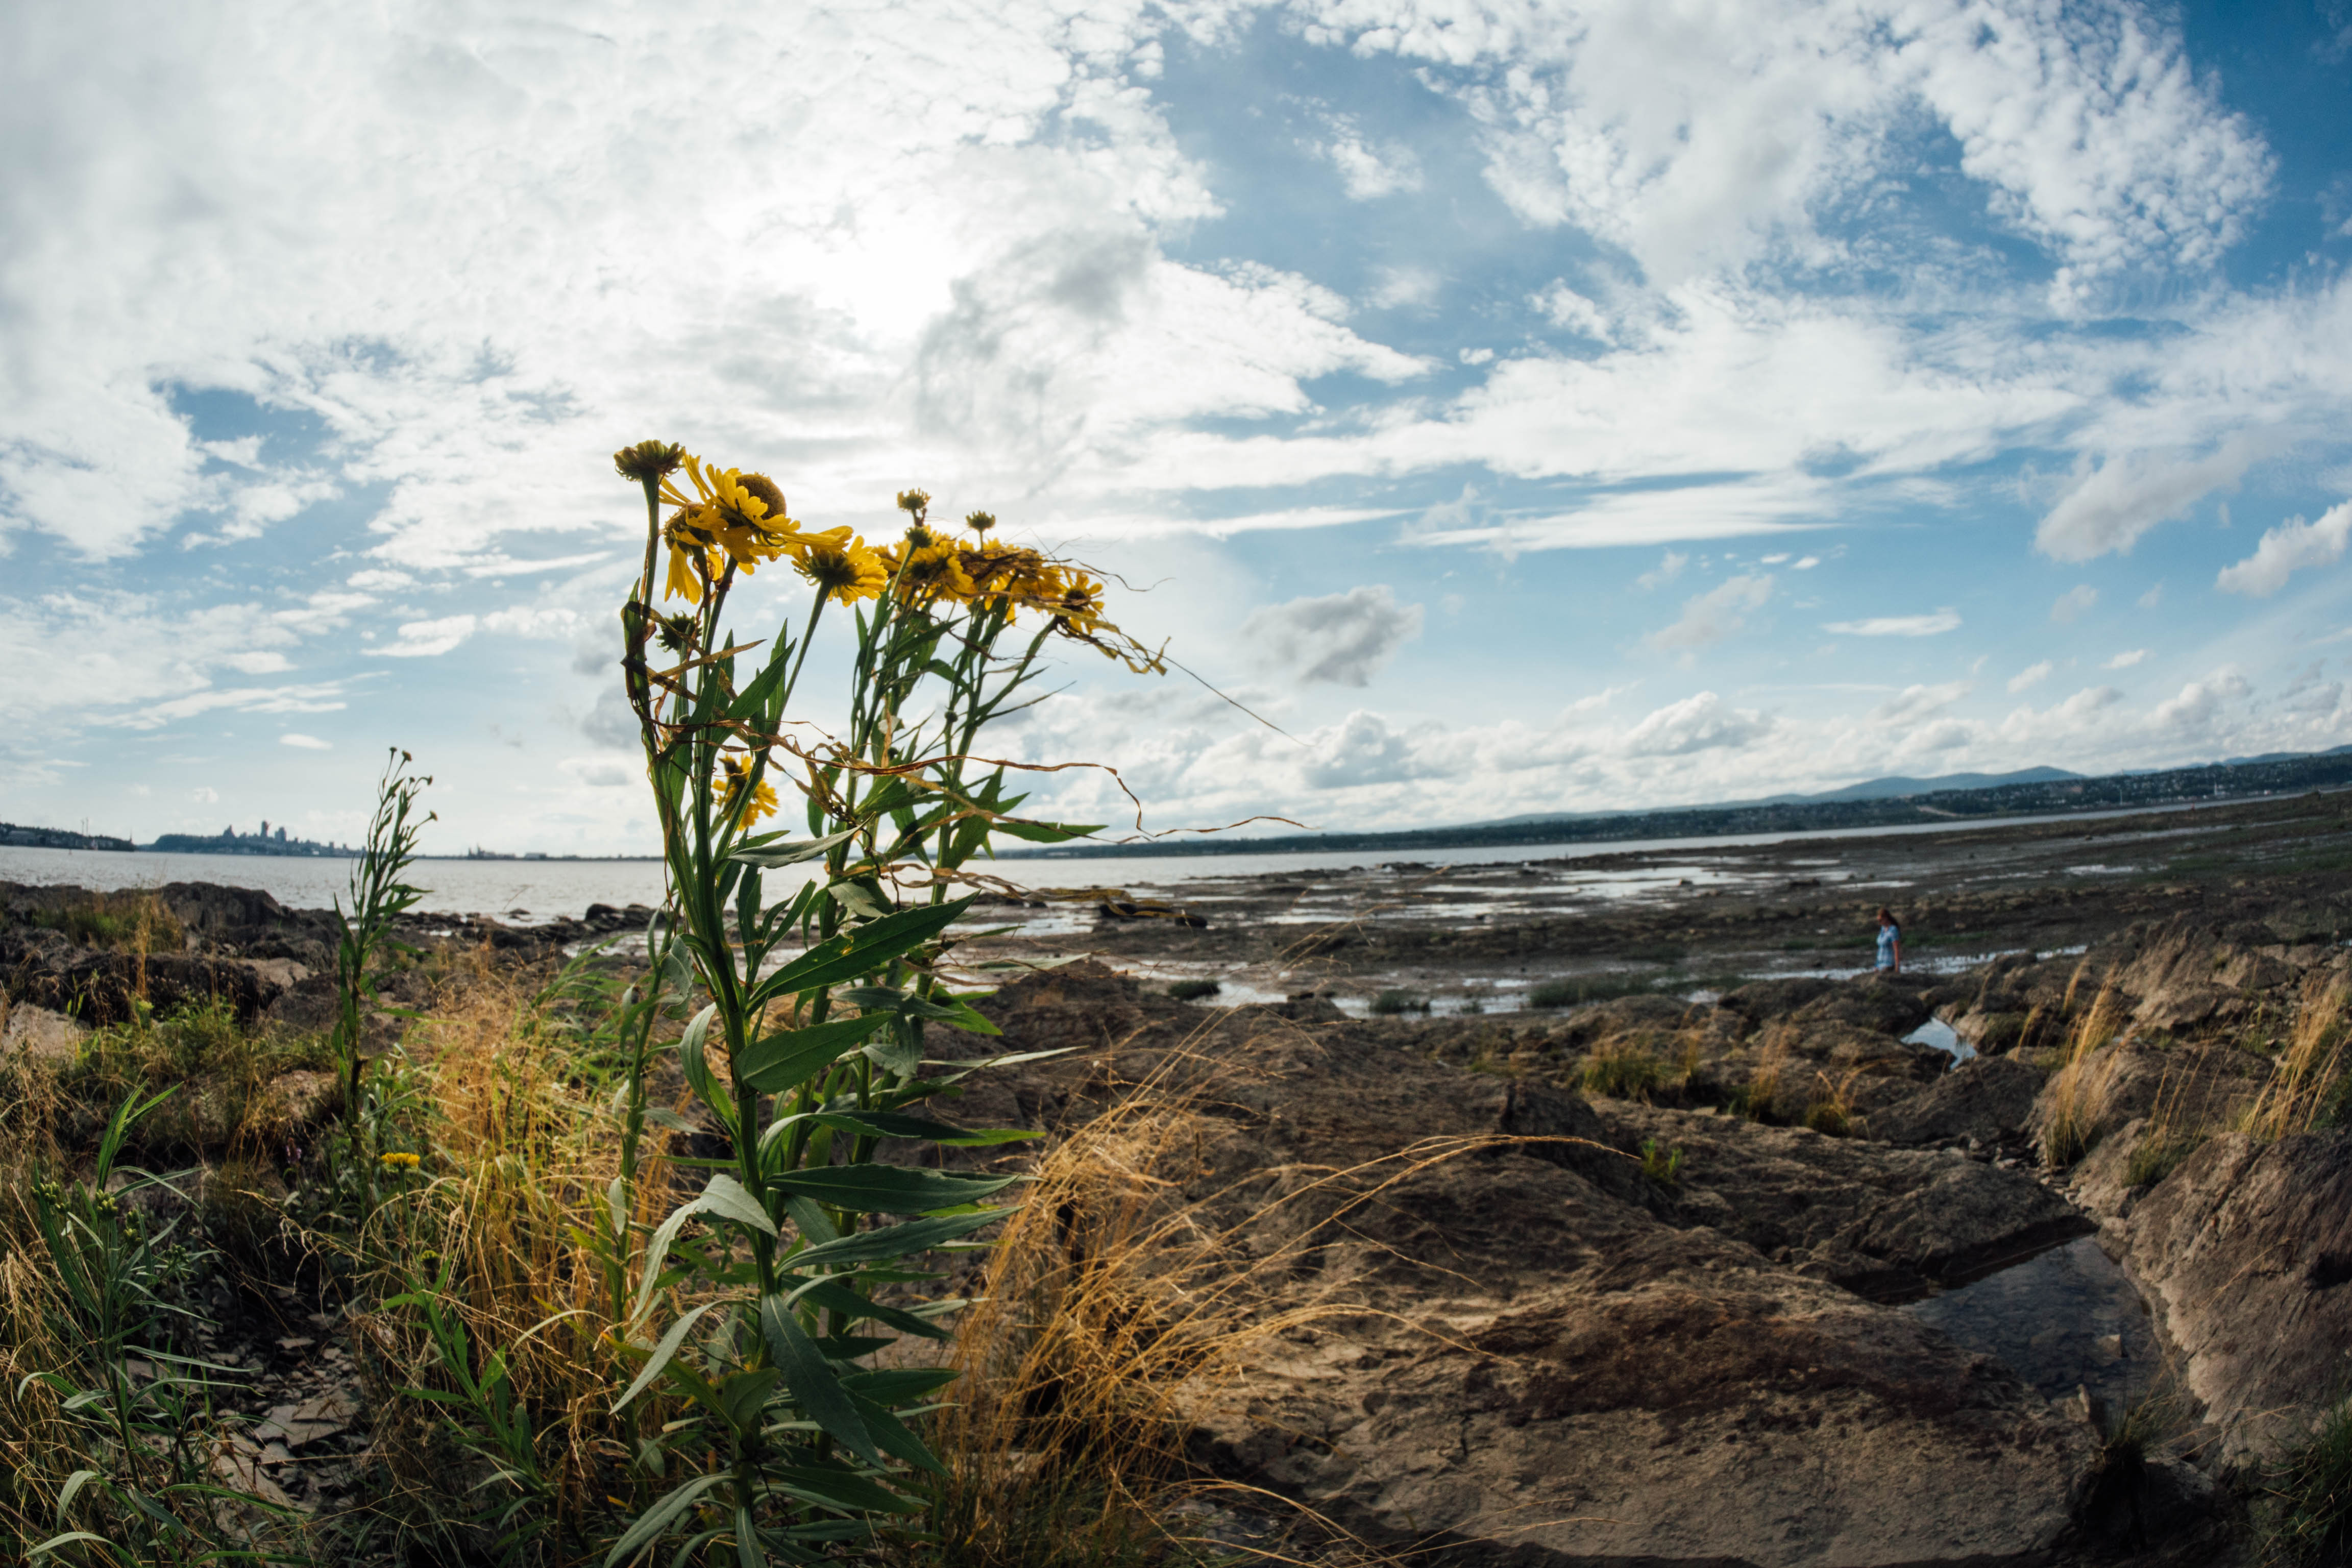 Yellow wild flowers grow on the banks of a rocky seaside shore, blooming despite the harsh conditions.